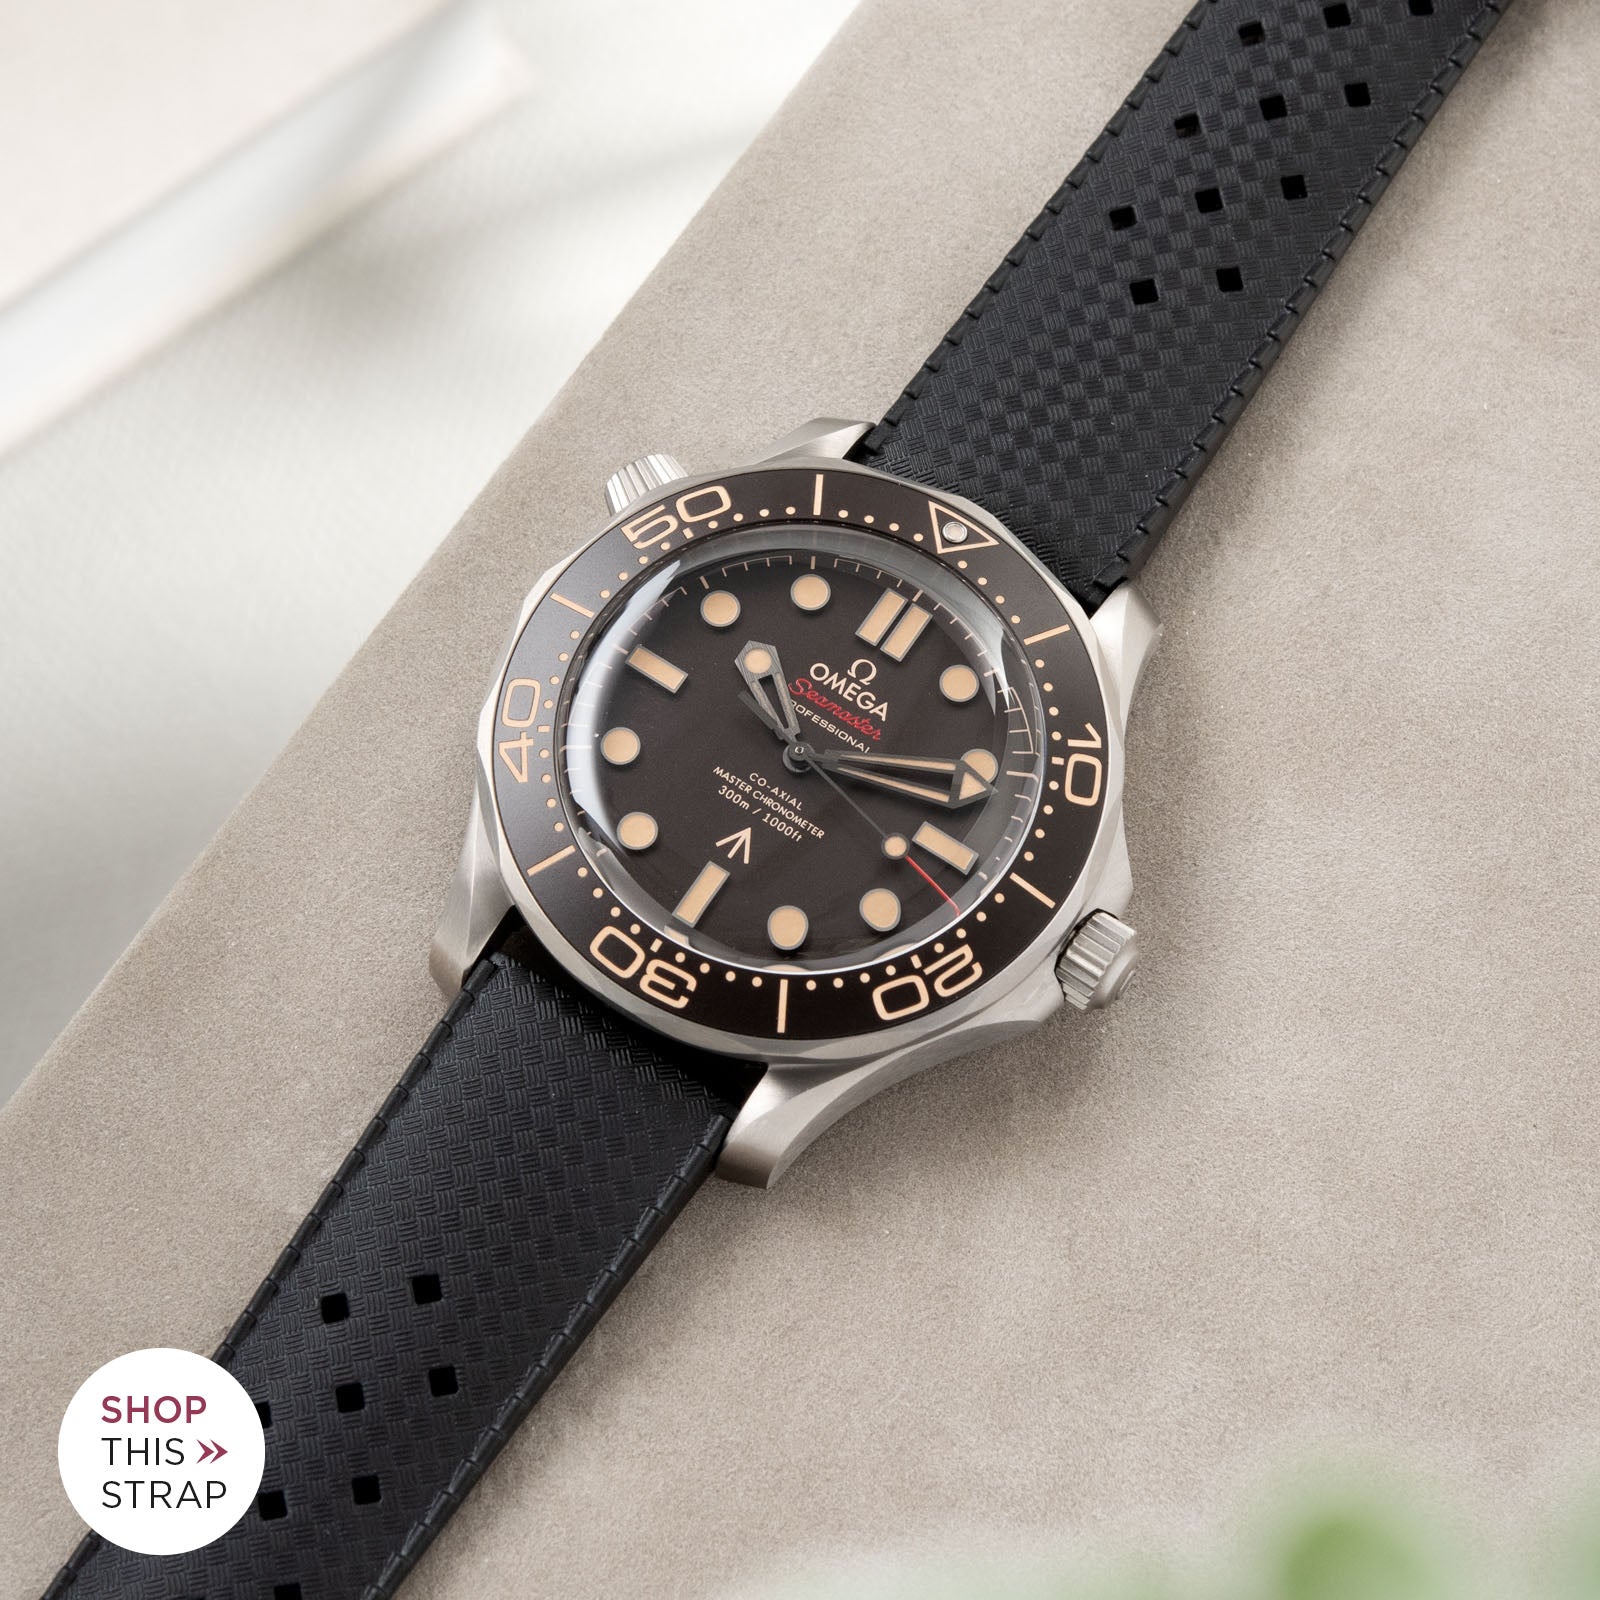 Bulang and Sons_Strap Guide_The Omega Seamaster James Bond_Nautic Basket Weave Black Rubber Watch Strap